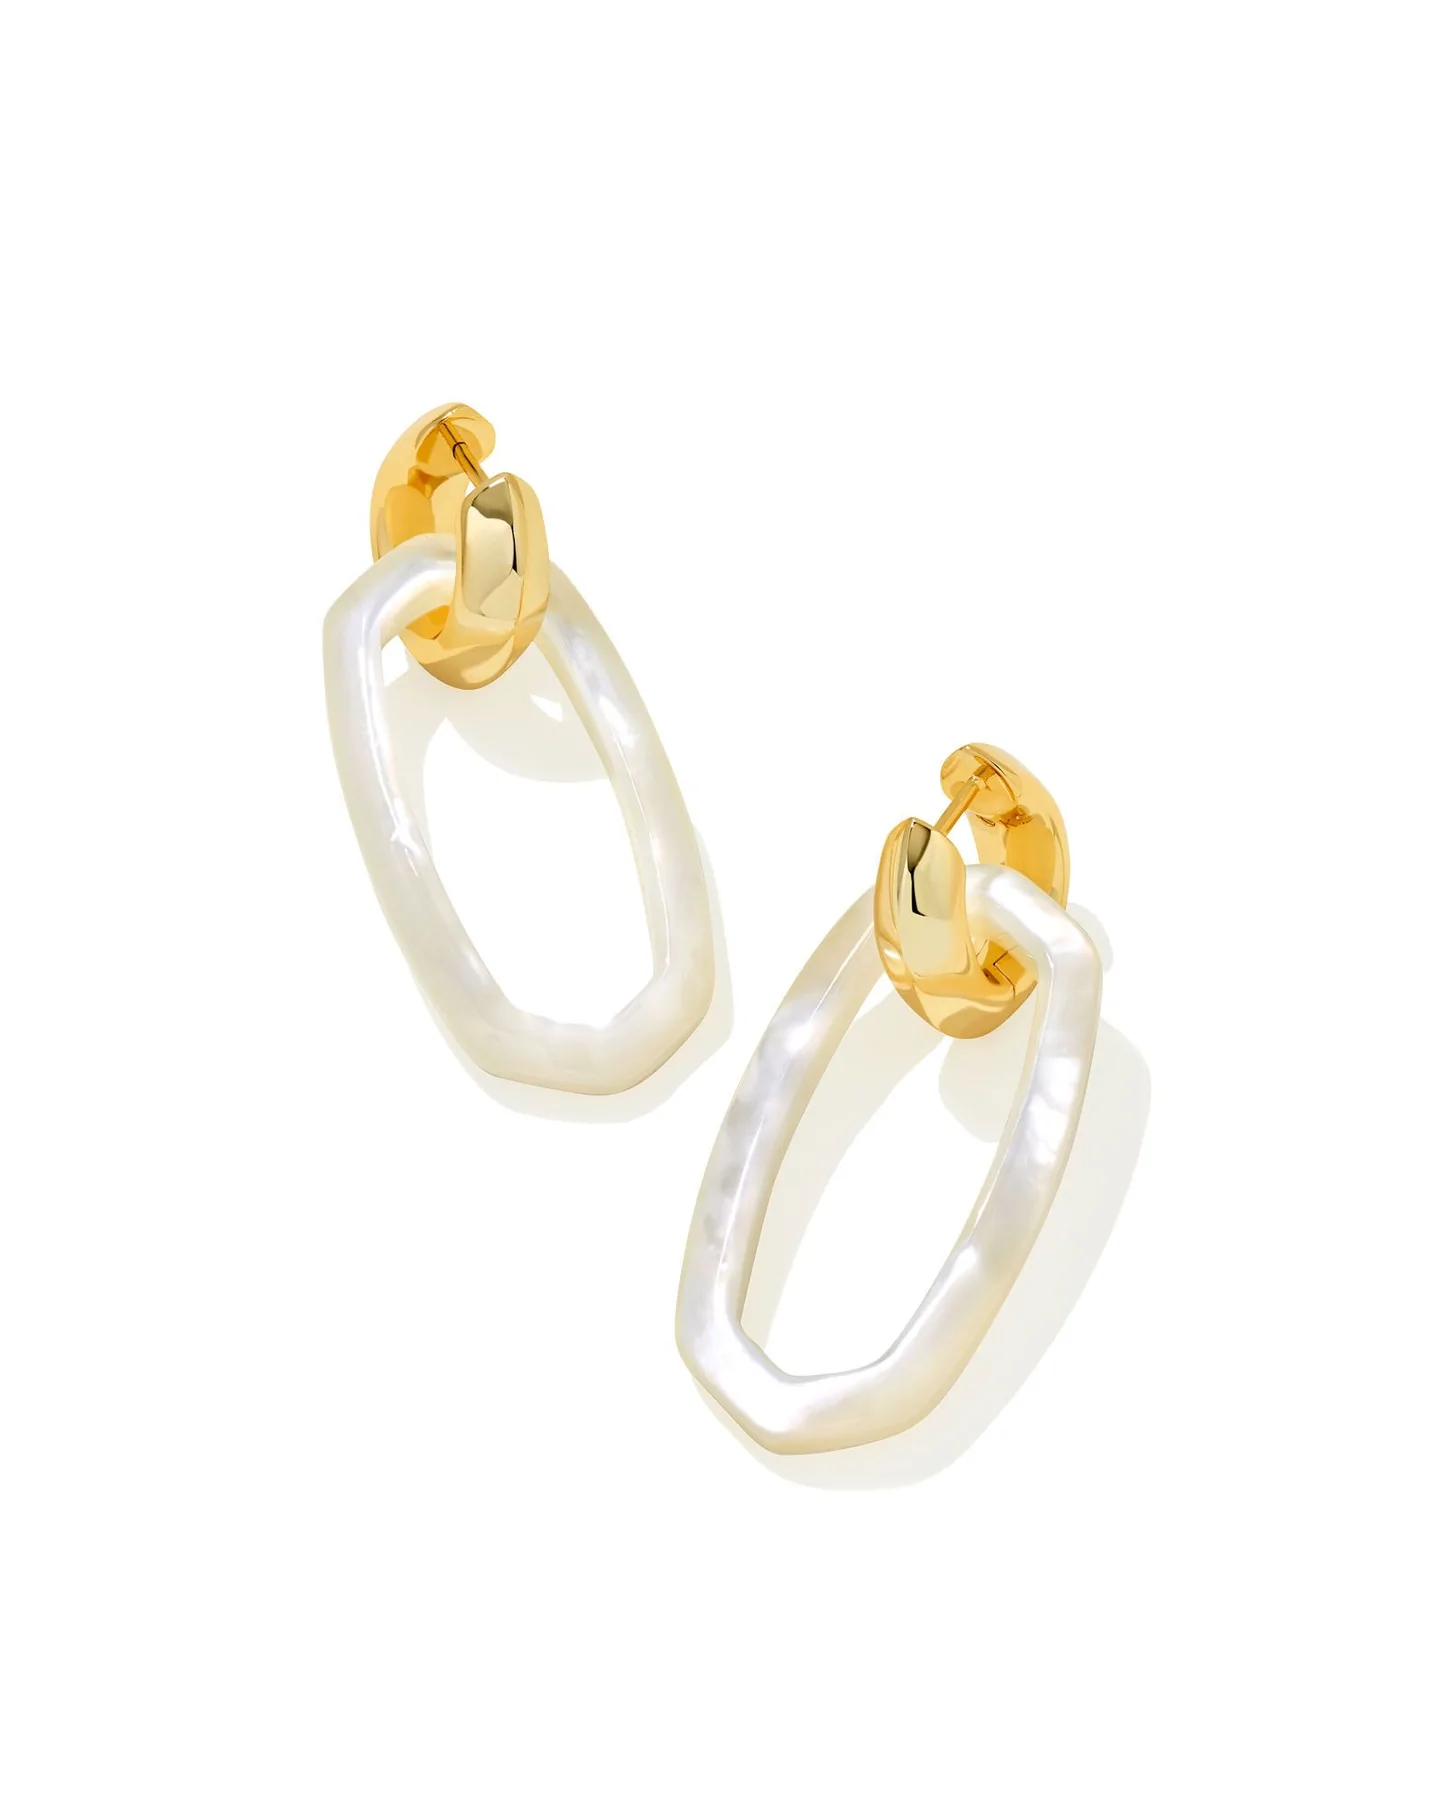 Danielle Gold Convertible Link Earrings in Ivory Mother-of-Pearl | 9608800943